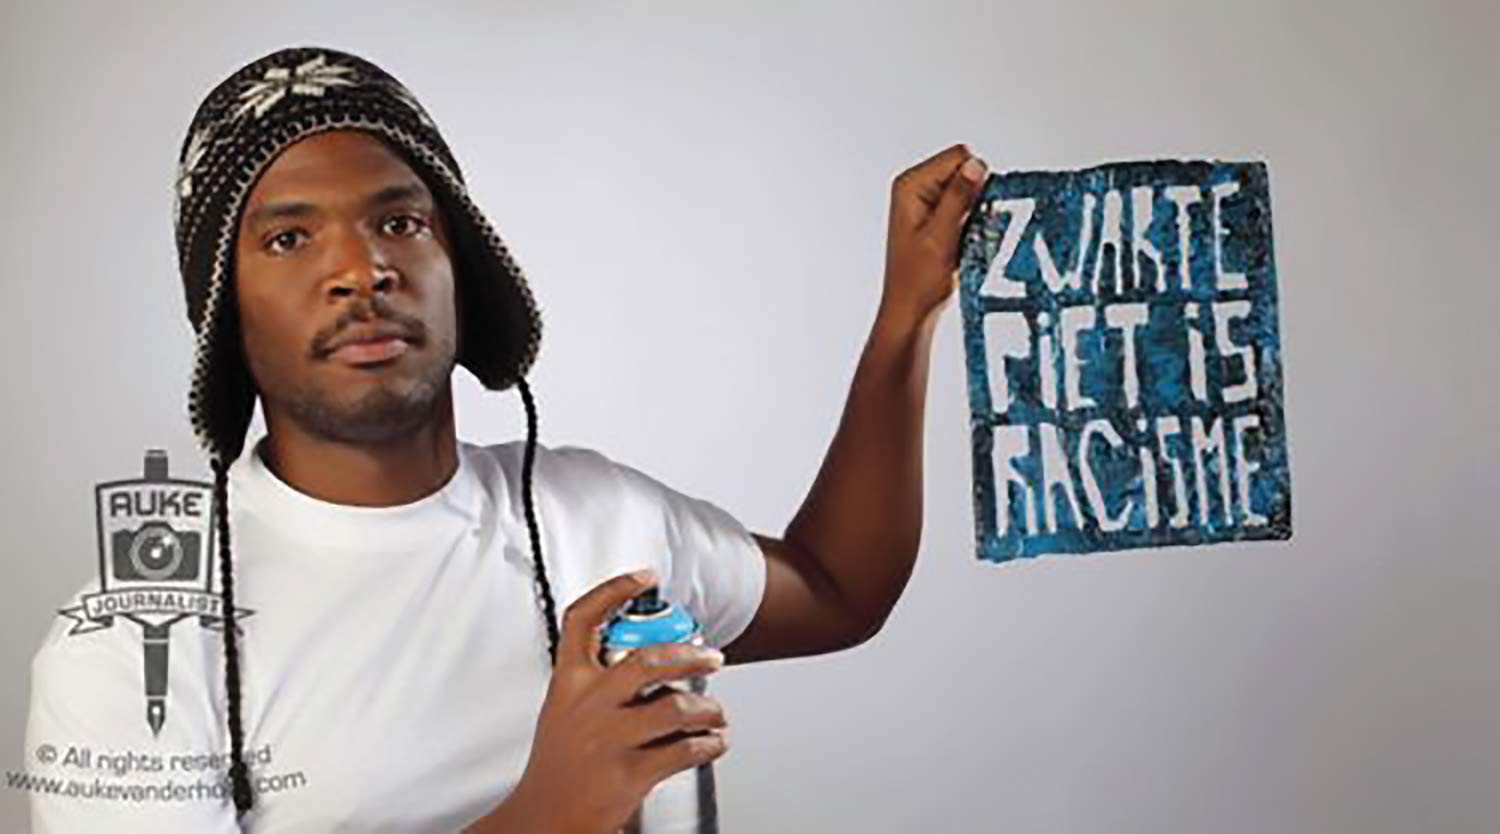 Student activist Quinsy Gario alongside the logo for the campaign “Zwarte Piet Is Racisme,” the Netherlands, November 2011.